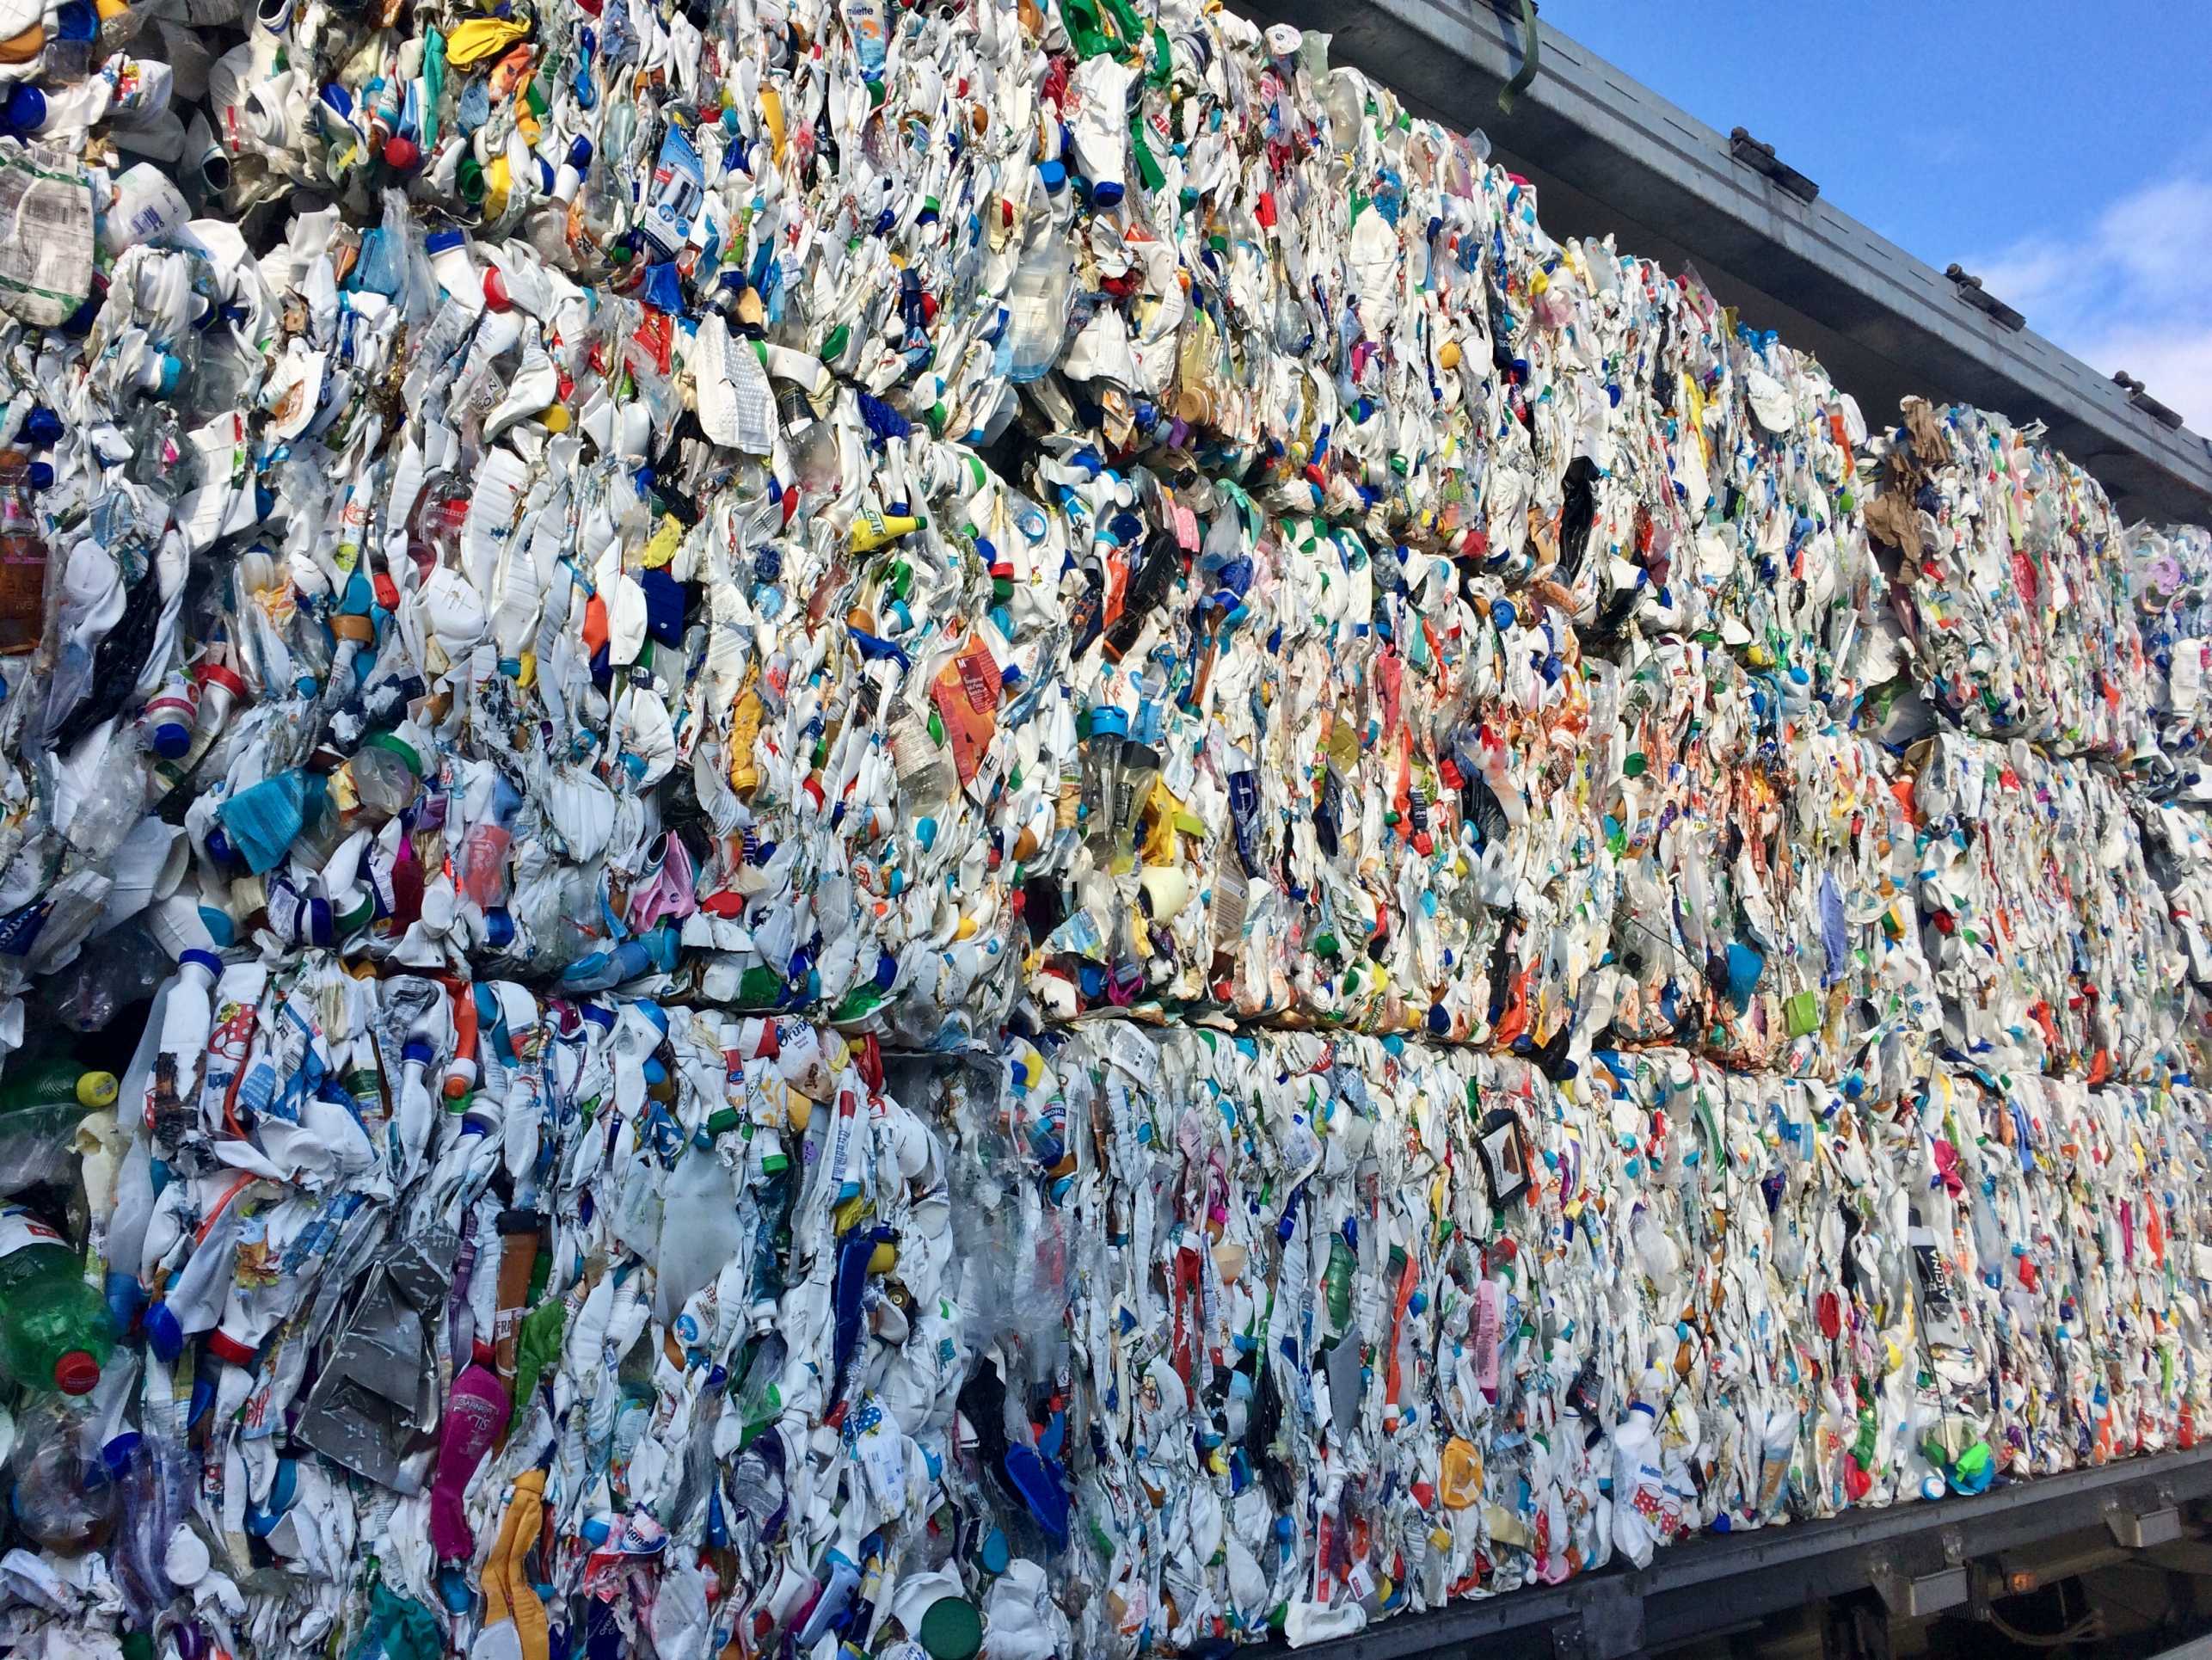 The limits of plastics circularity - Recycling of plastics can be increased